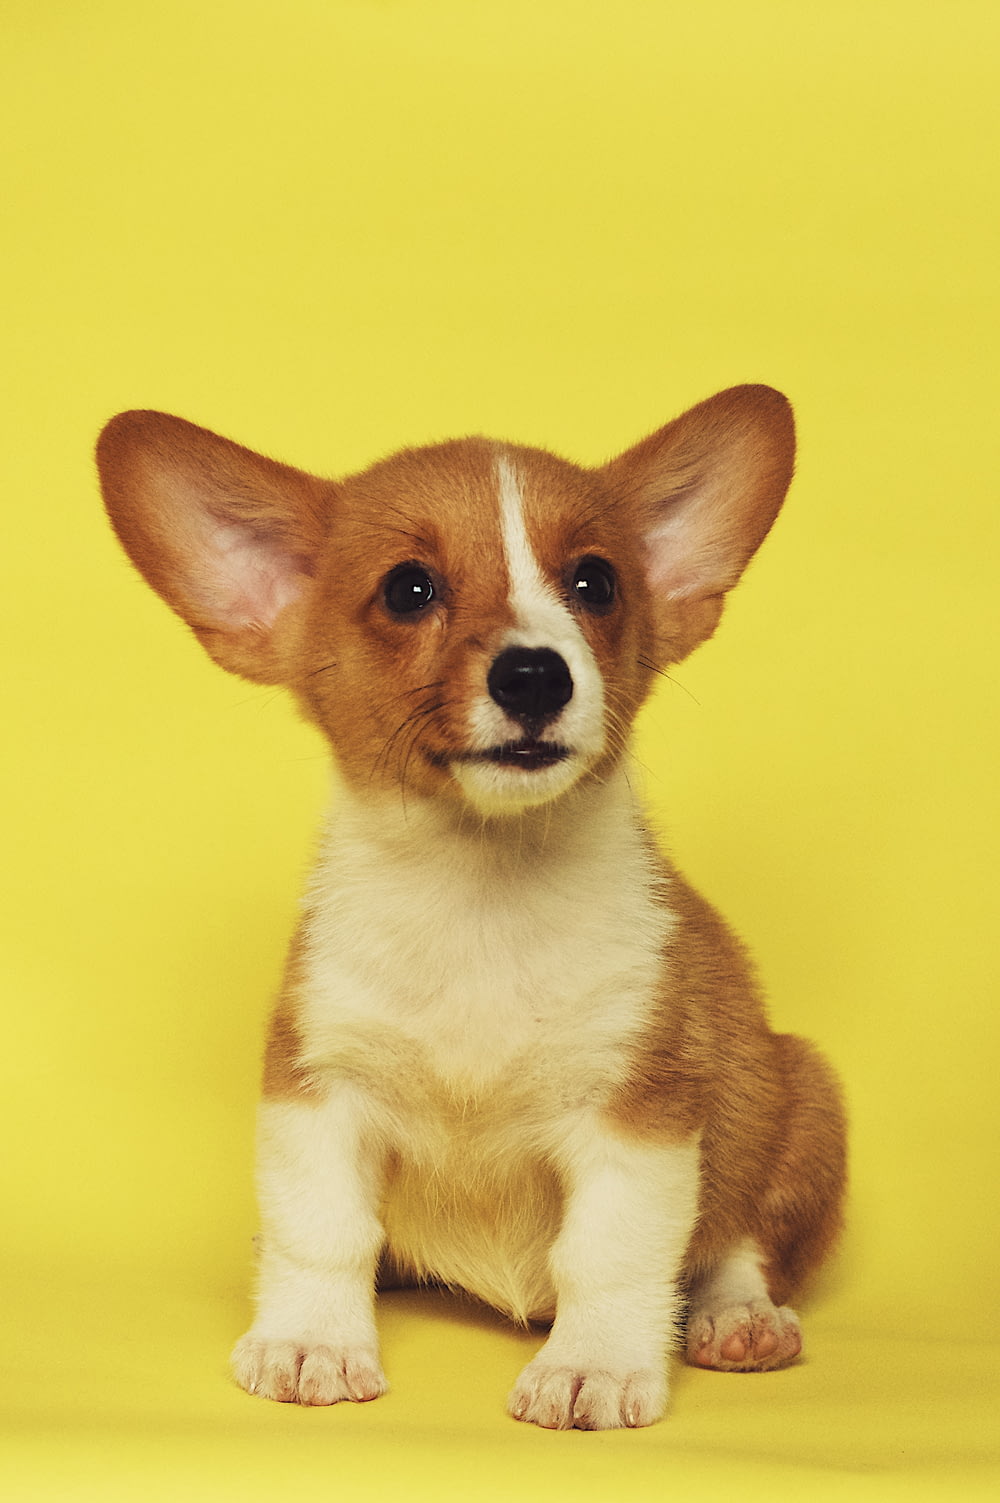 short-coated white and brown puppy sitting on yellow surface